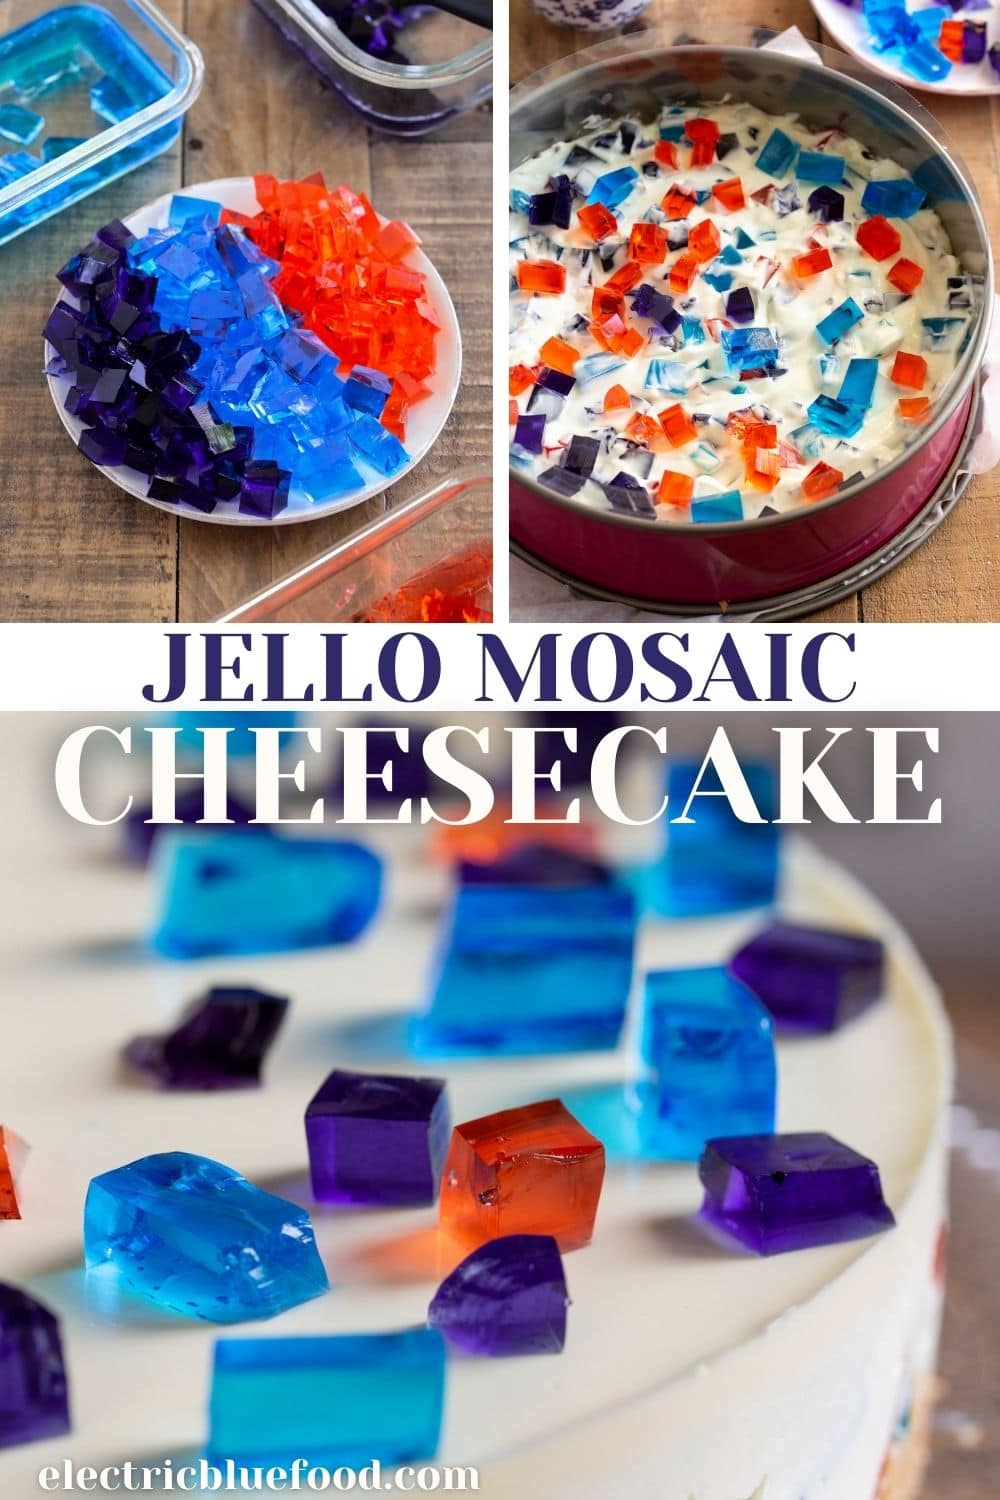 Mosaic Cheesecake with jello is a beautiful no-bake cheesecake with a stained glass pattern. Colorful jello folded into cheesecake filling creates a broken glass effect that makes every slice a surprise. Top with jello dice for a gemstone effect.